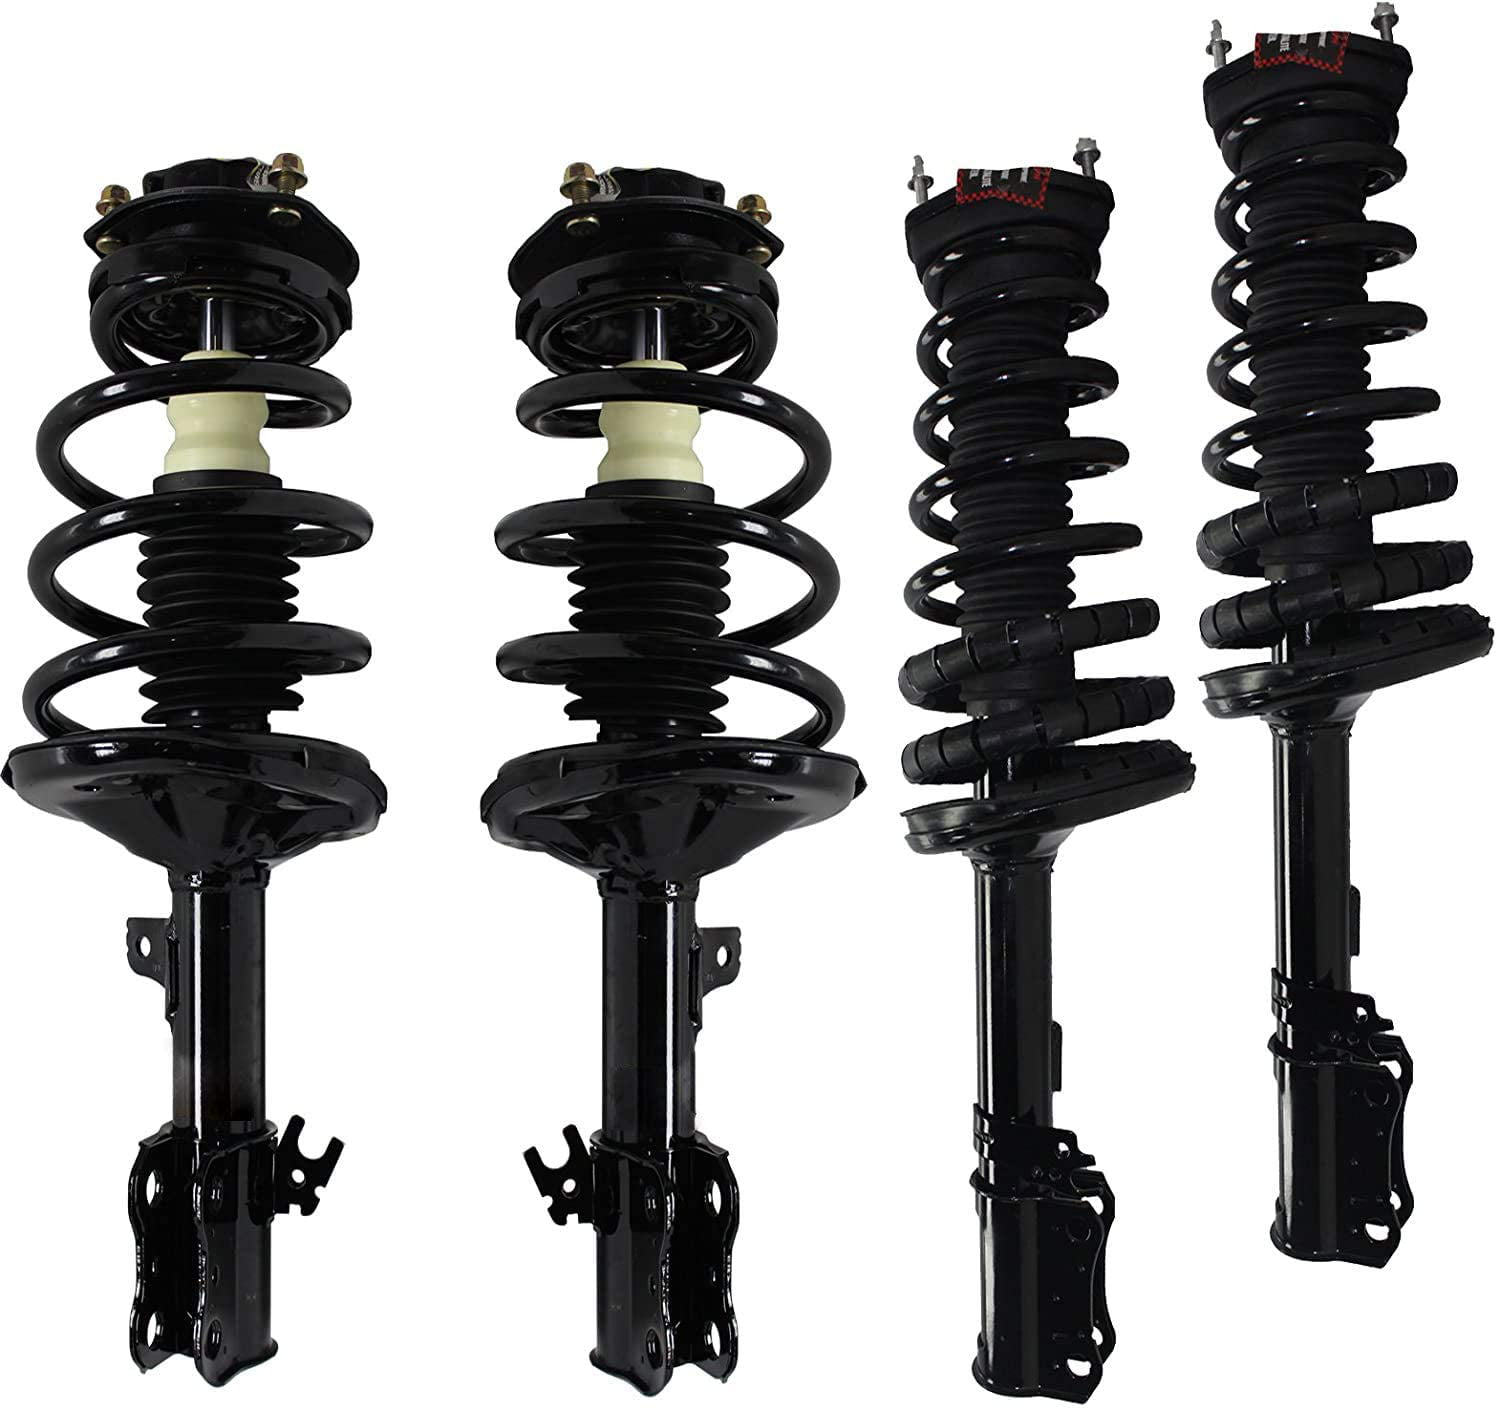 ECCPP Complete Struts Spring Assembly Front Rear Struts Shock Absorber Fit for 1997-2003 Toyota Avalon,1997-2001 Toyota Camry,1999-2003 Toyota Solara,1997-2001 Lexus ES300 Set of 4 